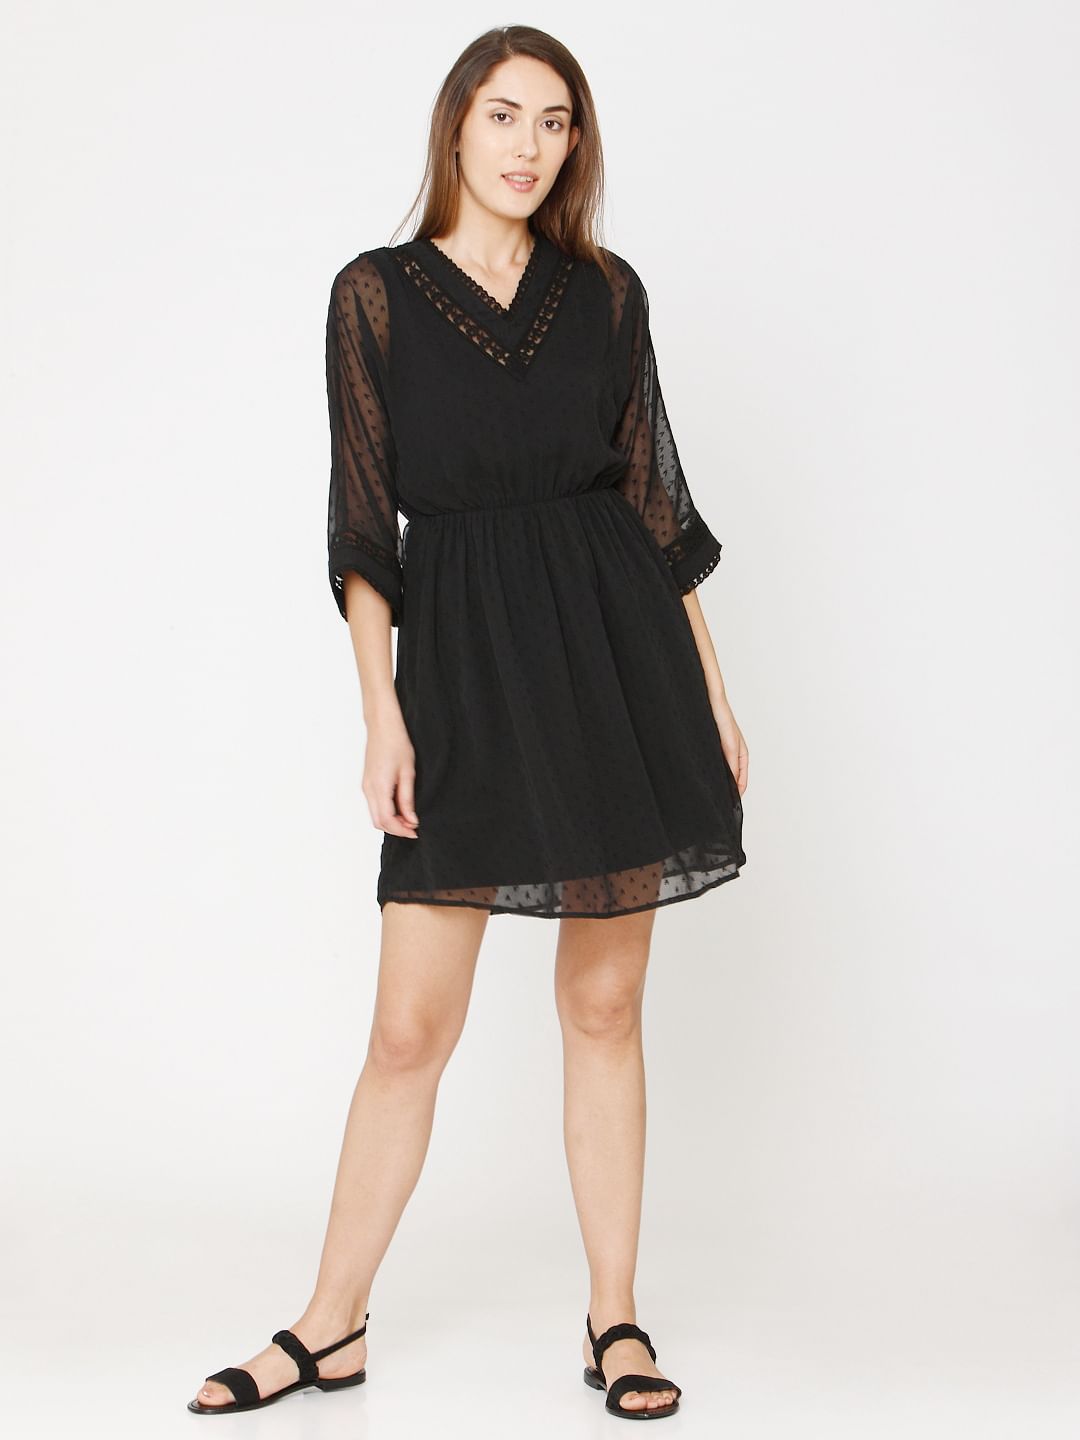 black fit and flare work dress